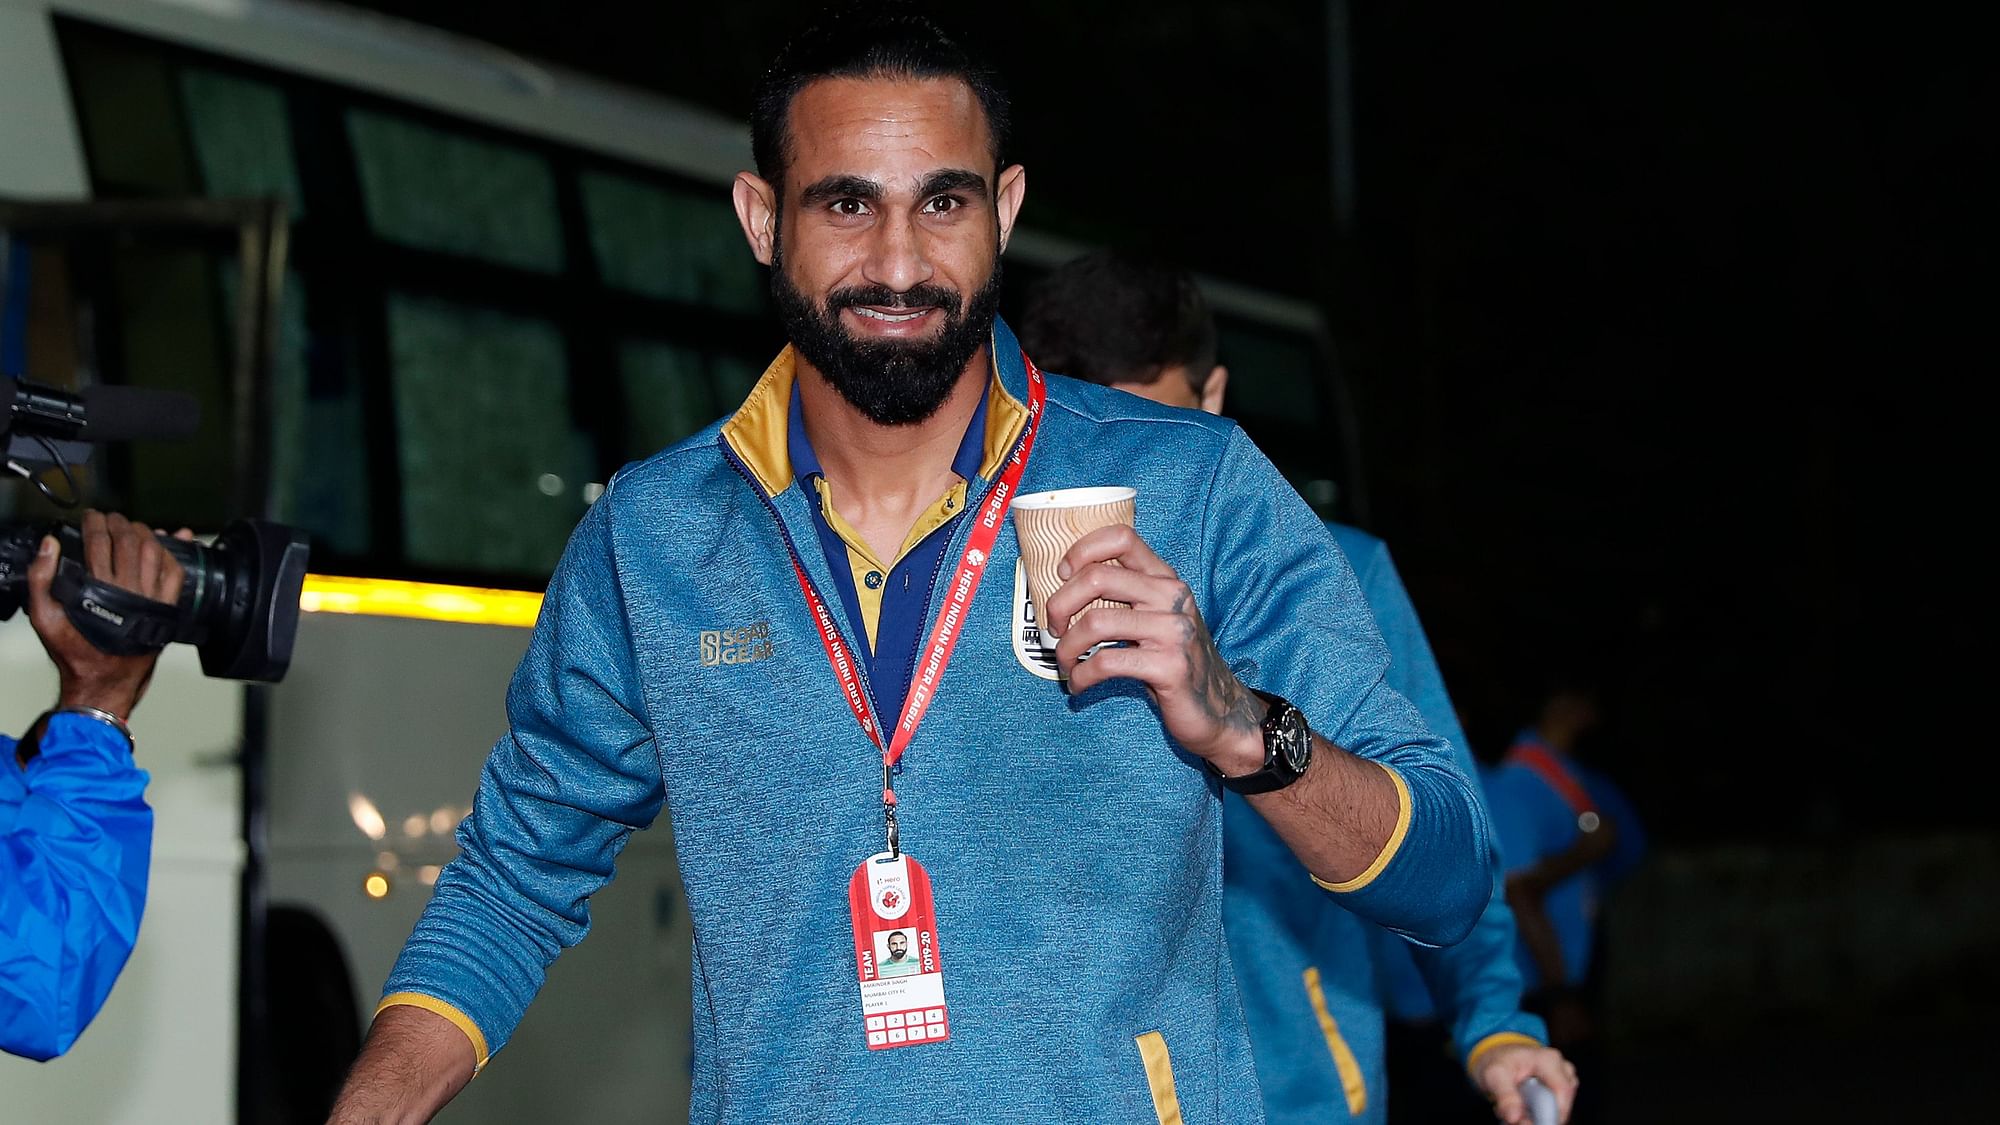 Amrinder Singh’s senior professional career started at the age of 18 with the  Pune FC.